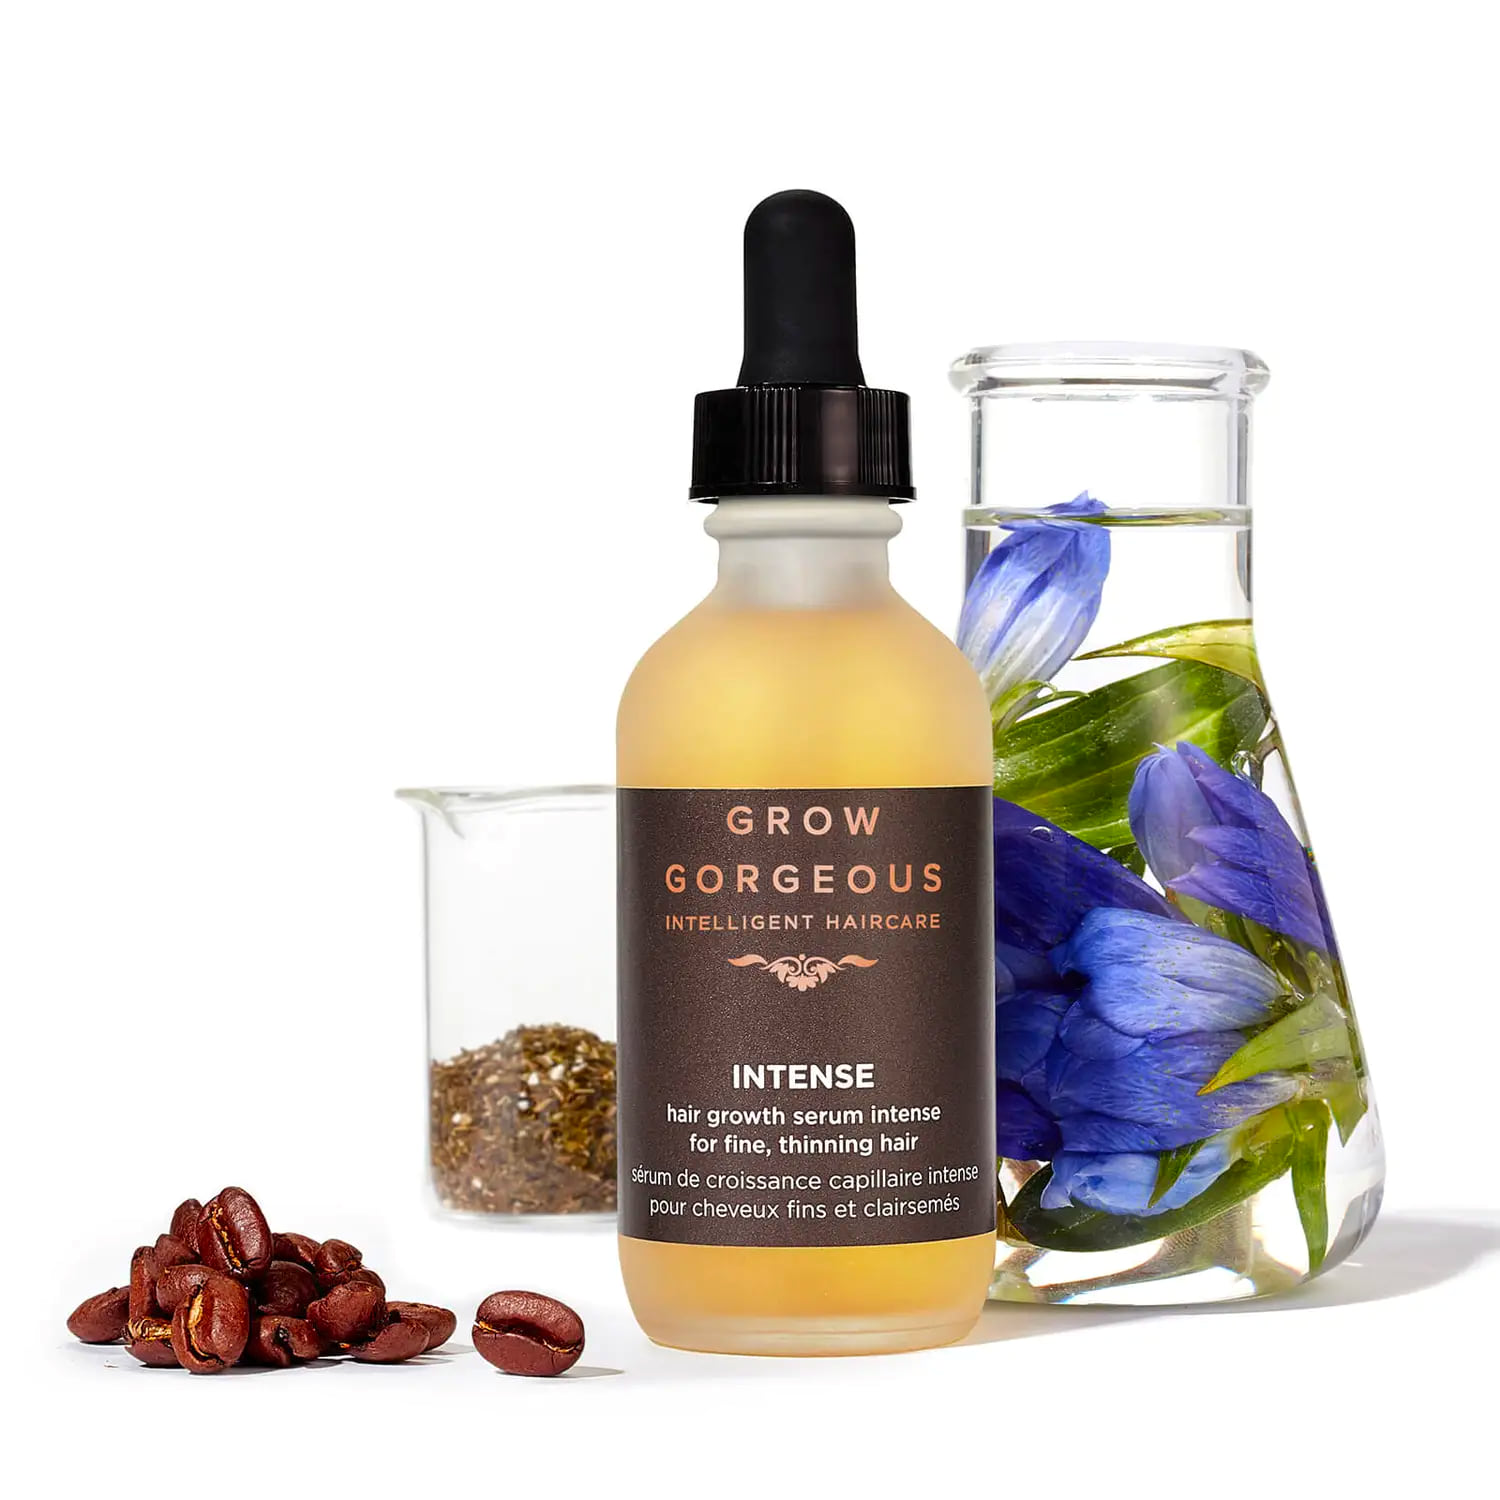 Grow Gorgeous Review